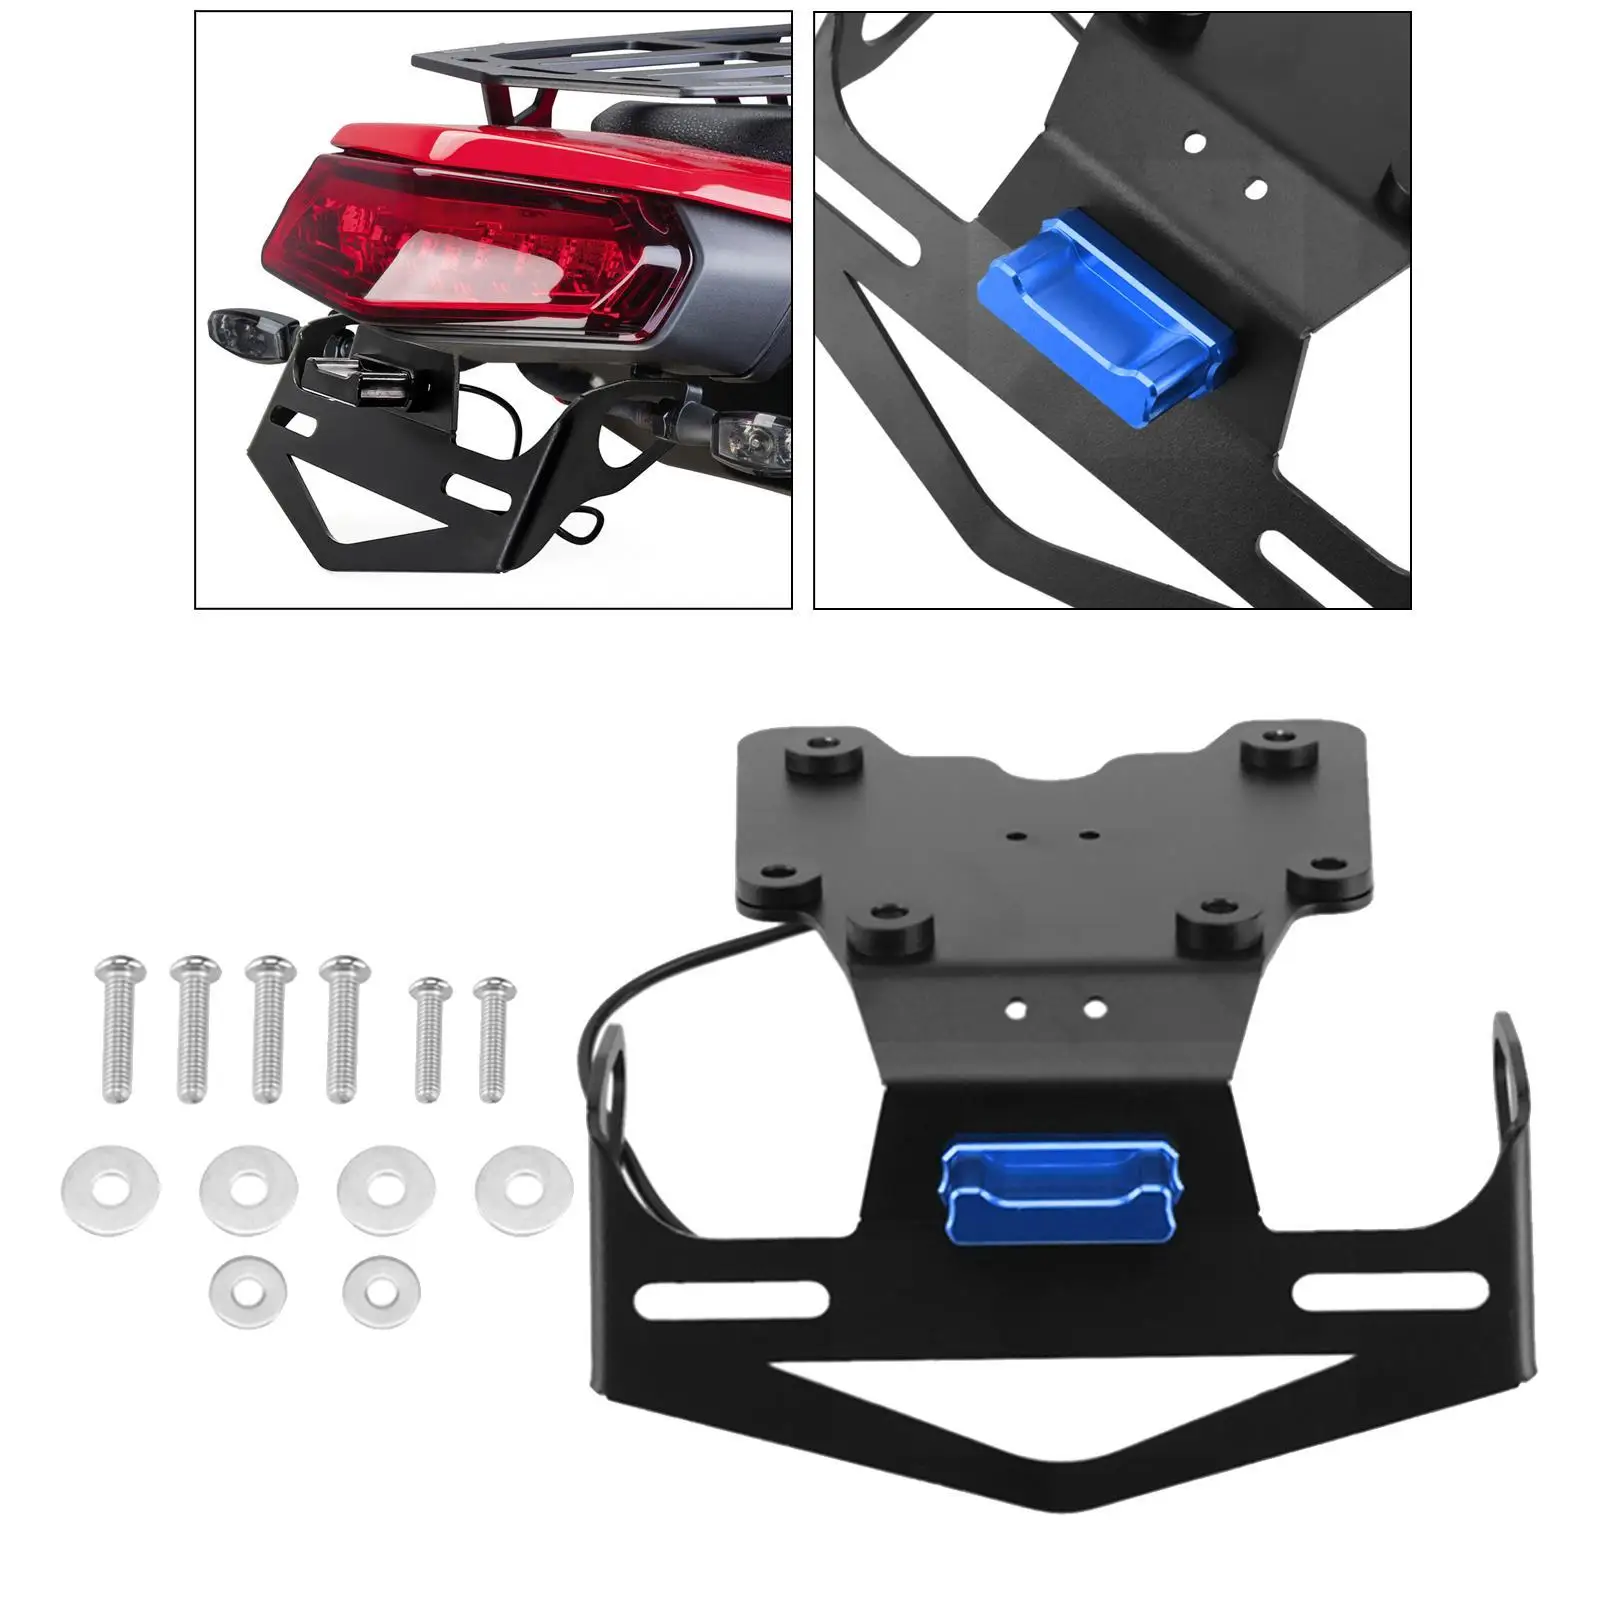 Motorcycle License Plate Holder Mount Fits for Tenere 700 2019-2021